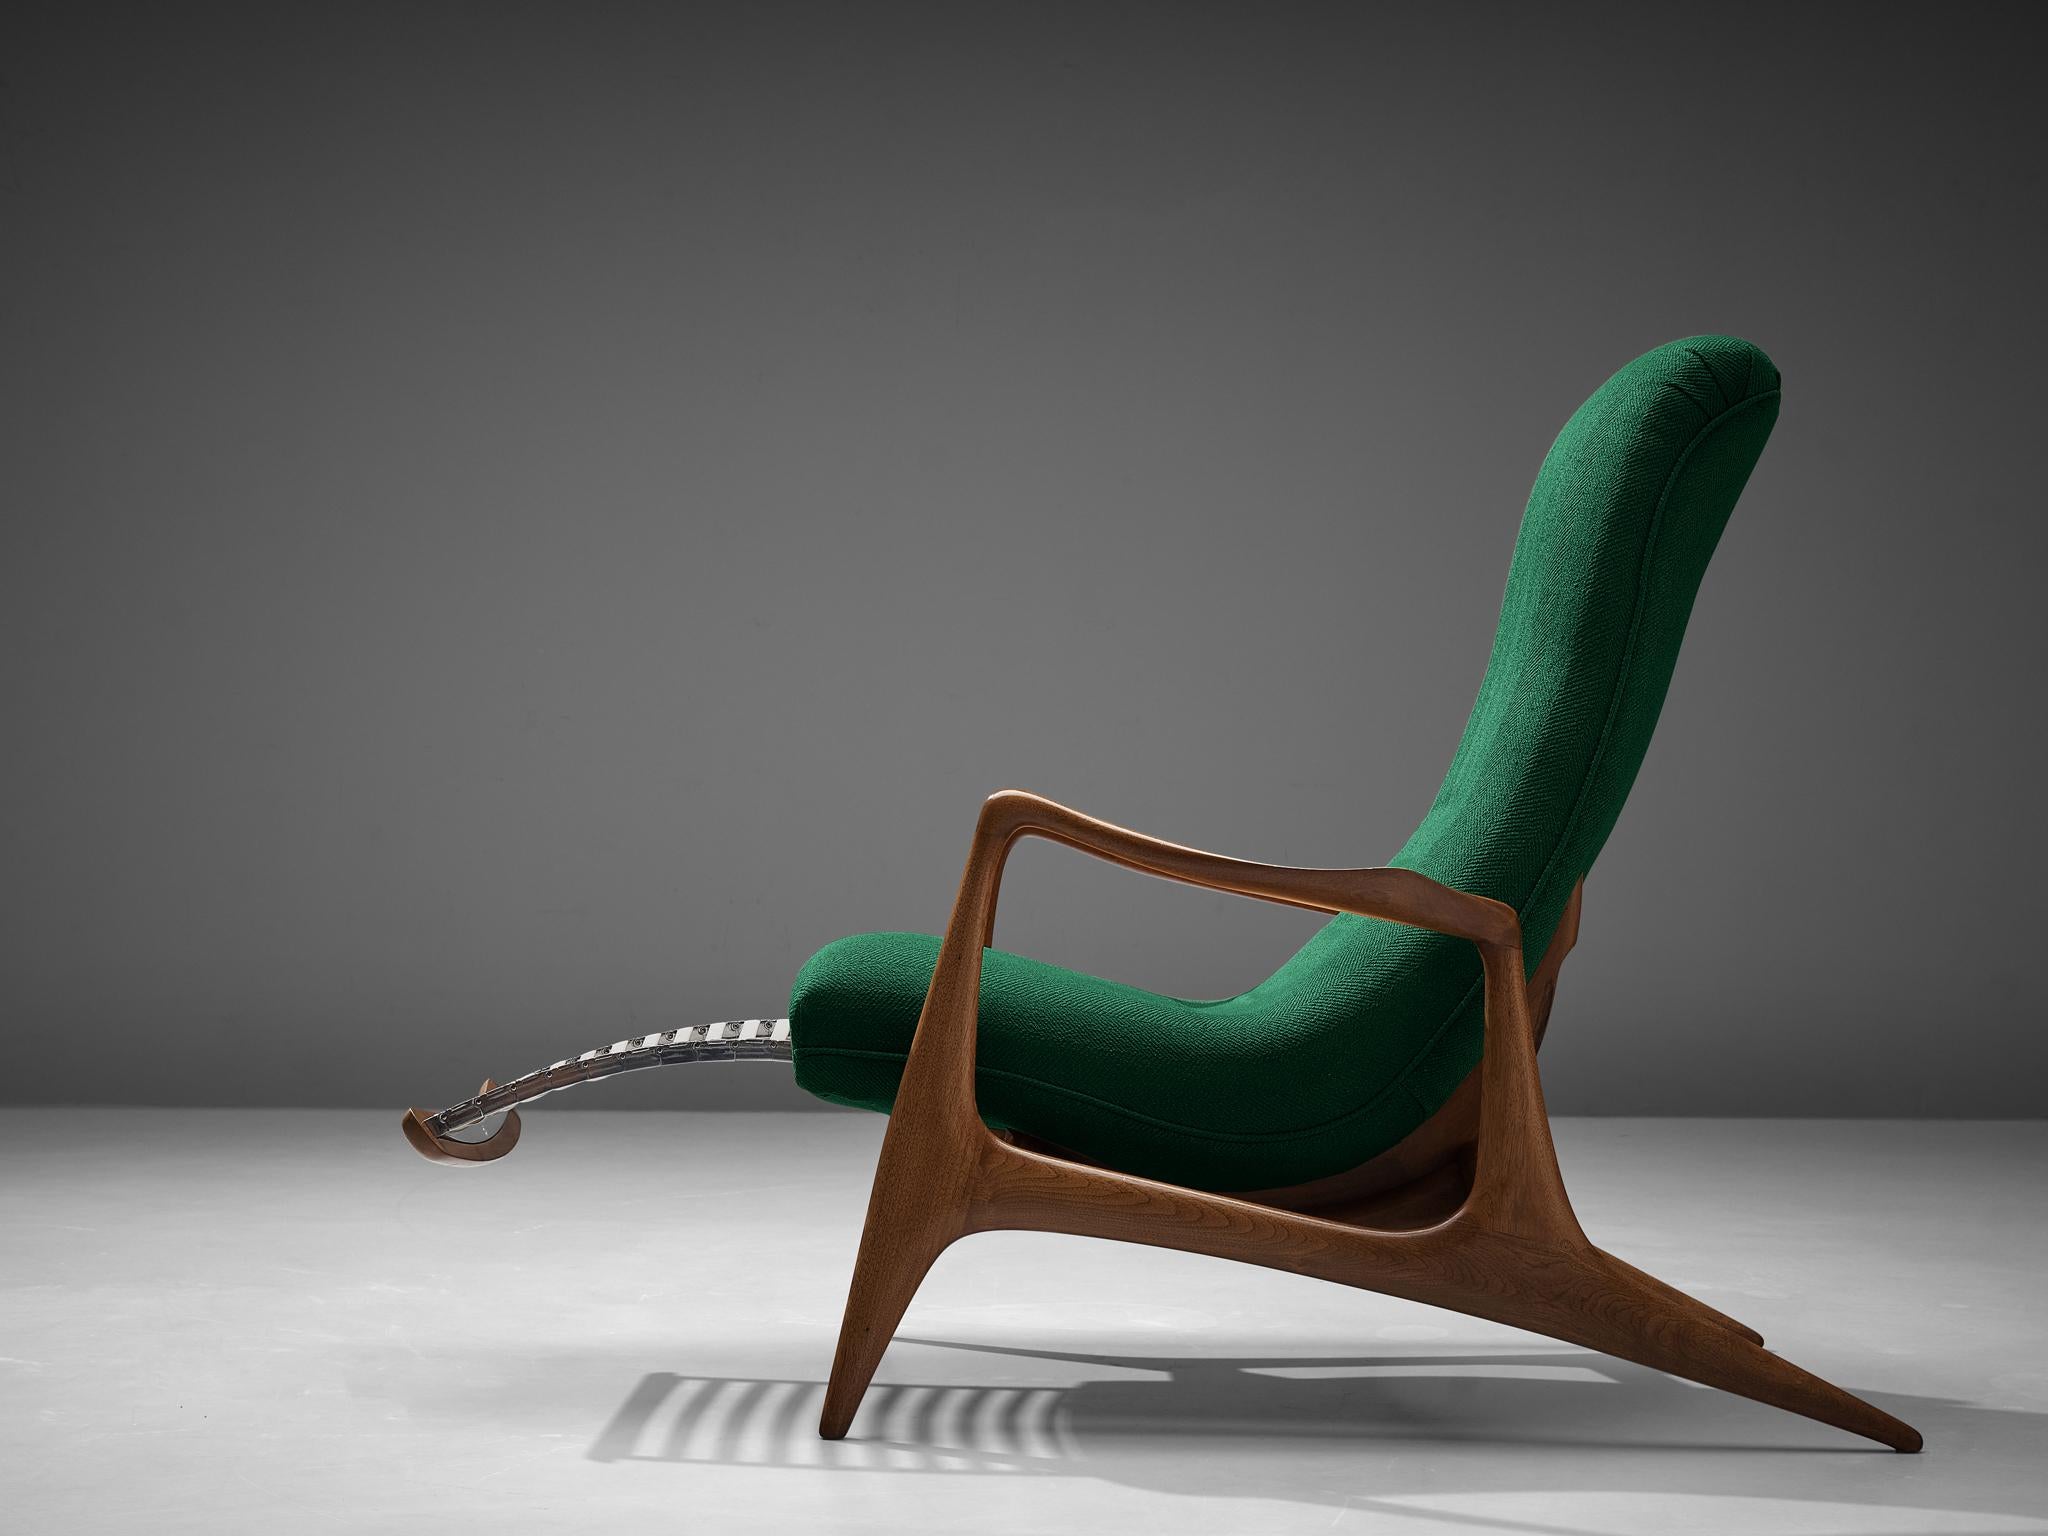 Mid-20th Century Vladimir Kagan for Dreyfuss Reclining ‘Contour’ Lounge Chair in Green Upholstery